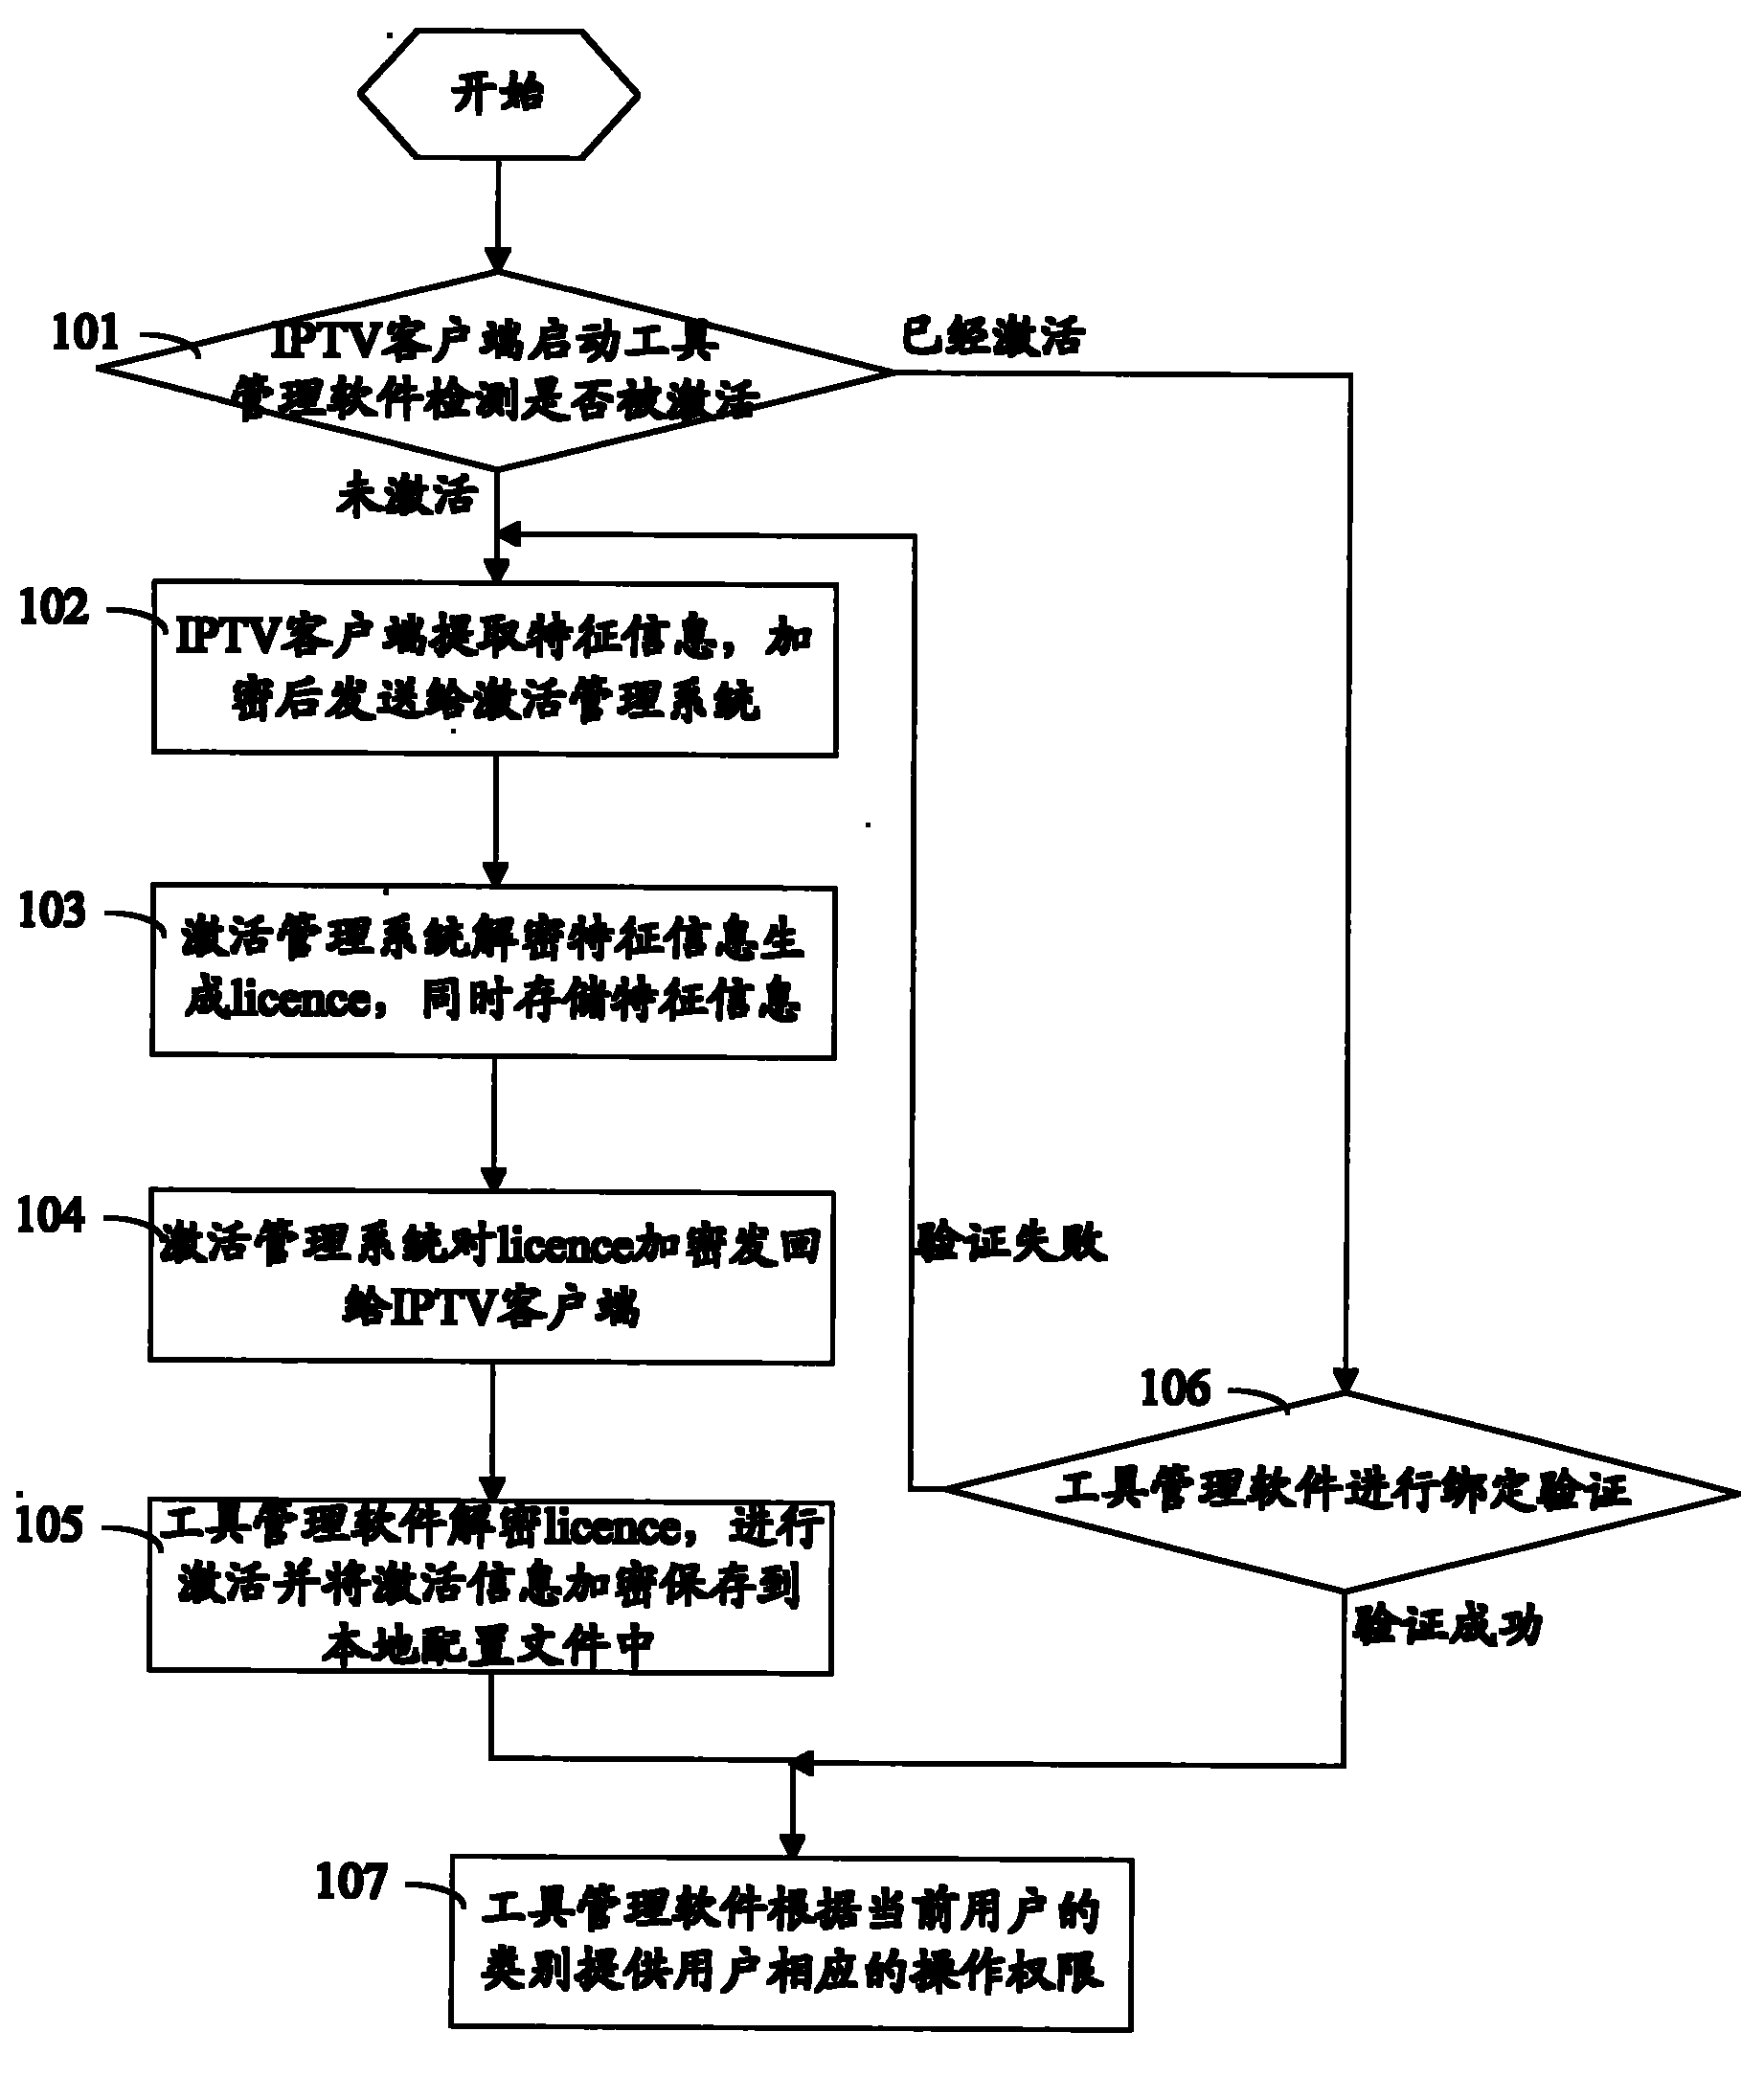 Method and system for activating and authenticating an internet protocol television client